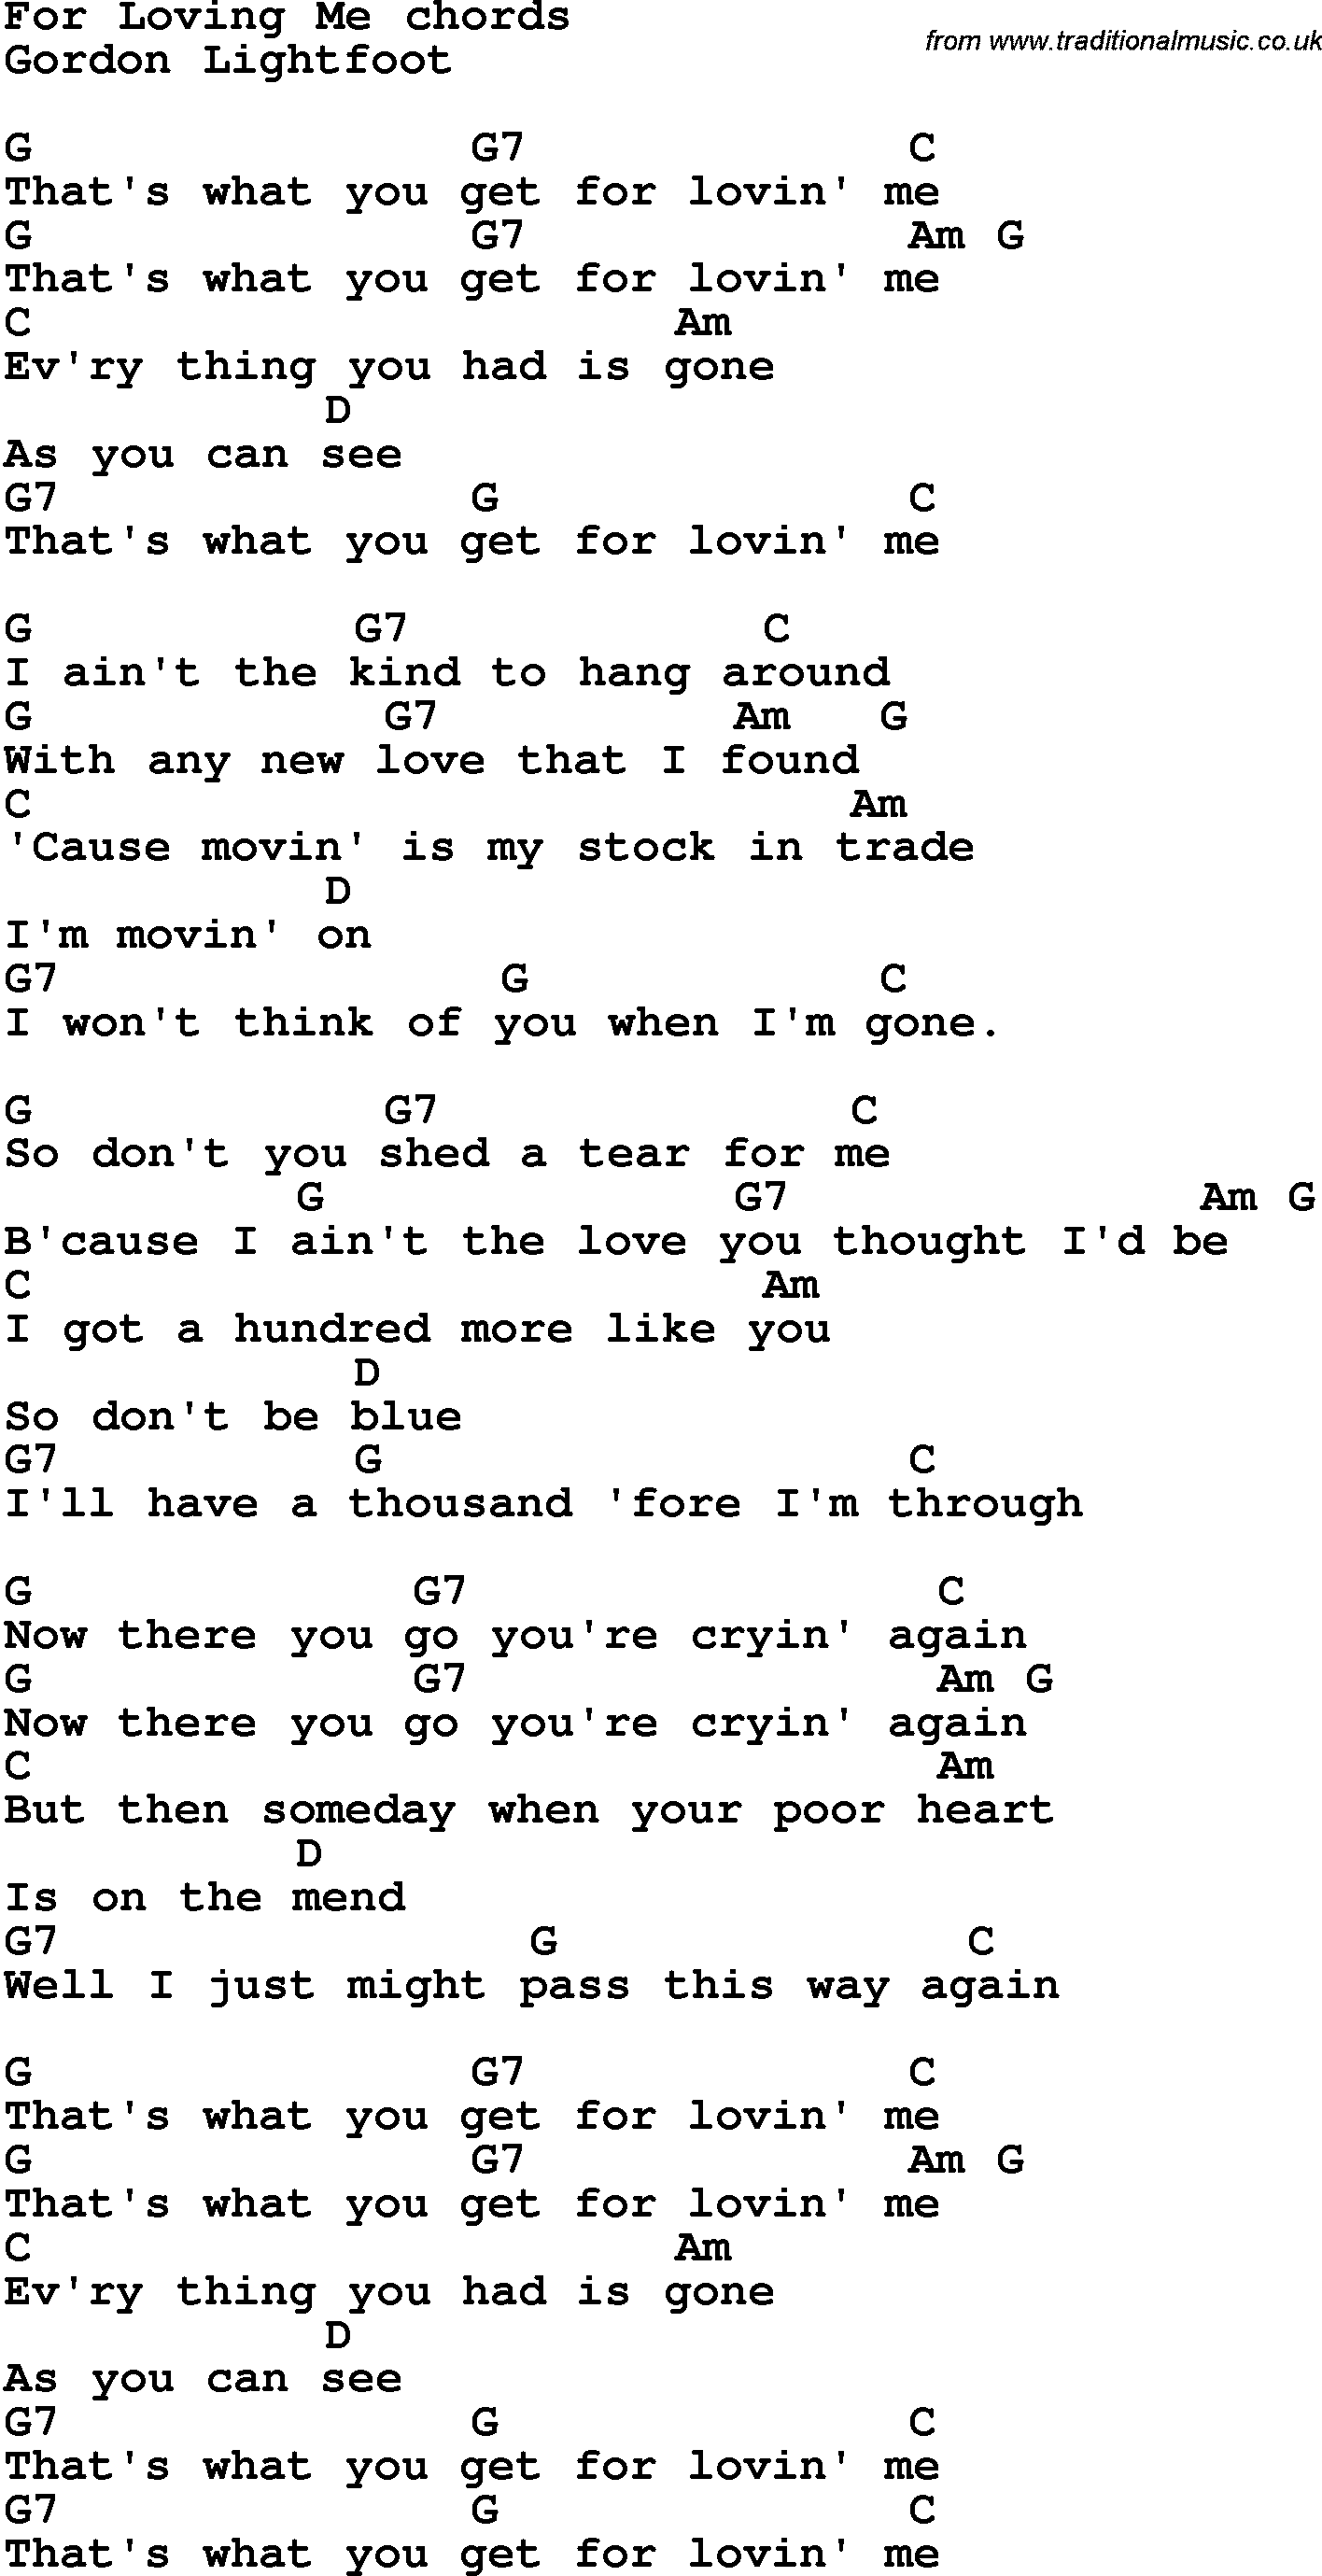 Song Lyrics with guitar chords for For Loving Me